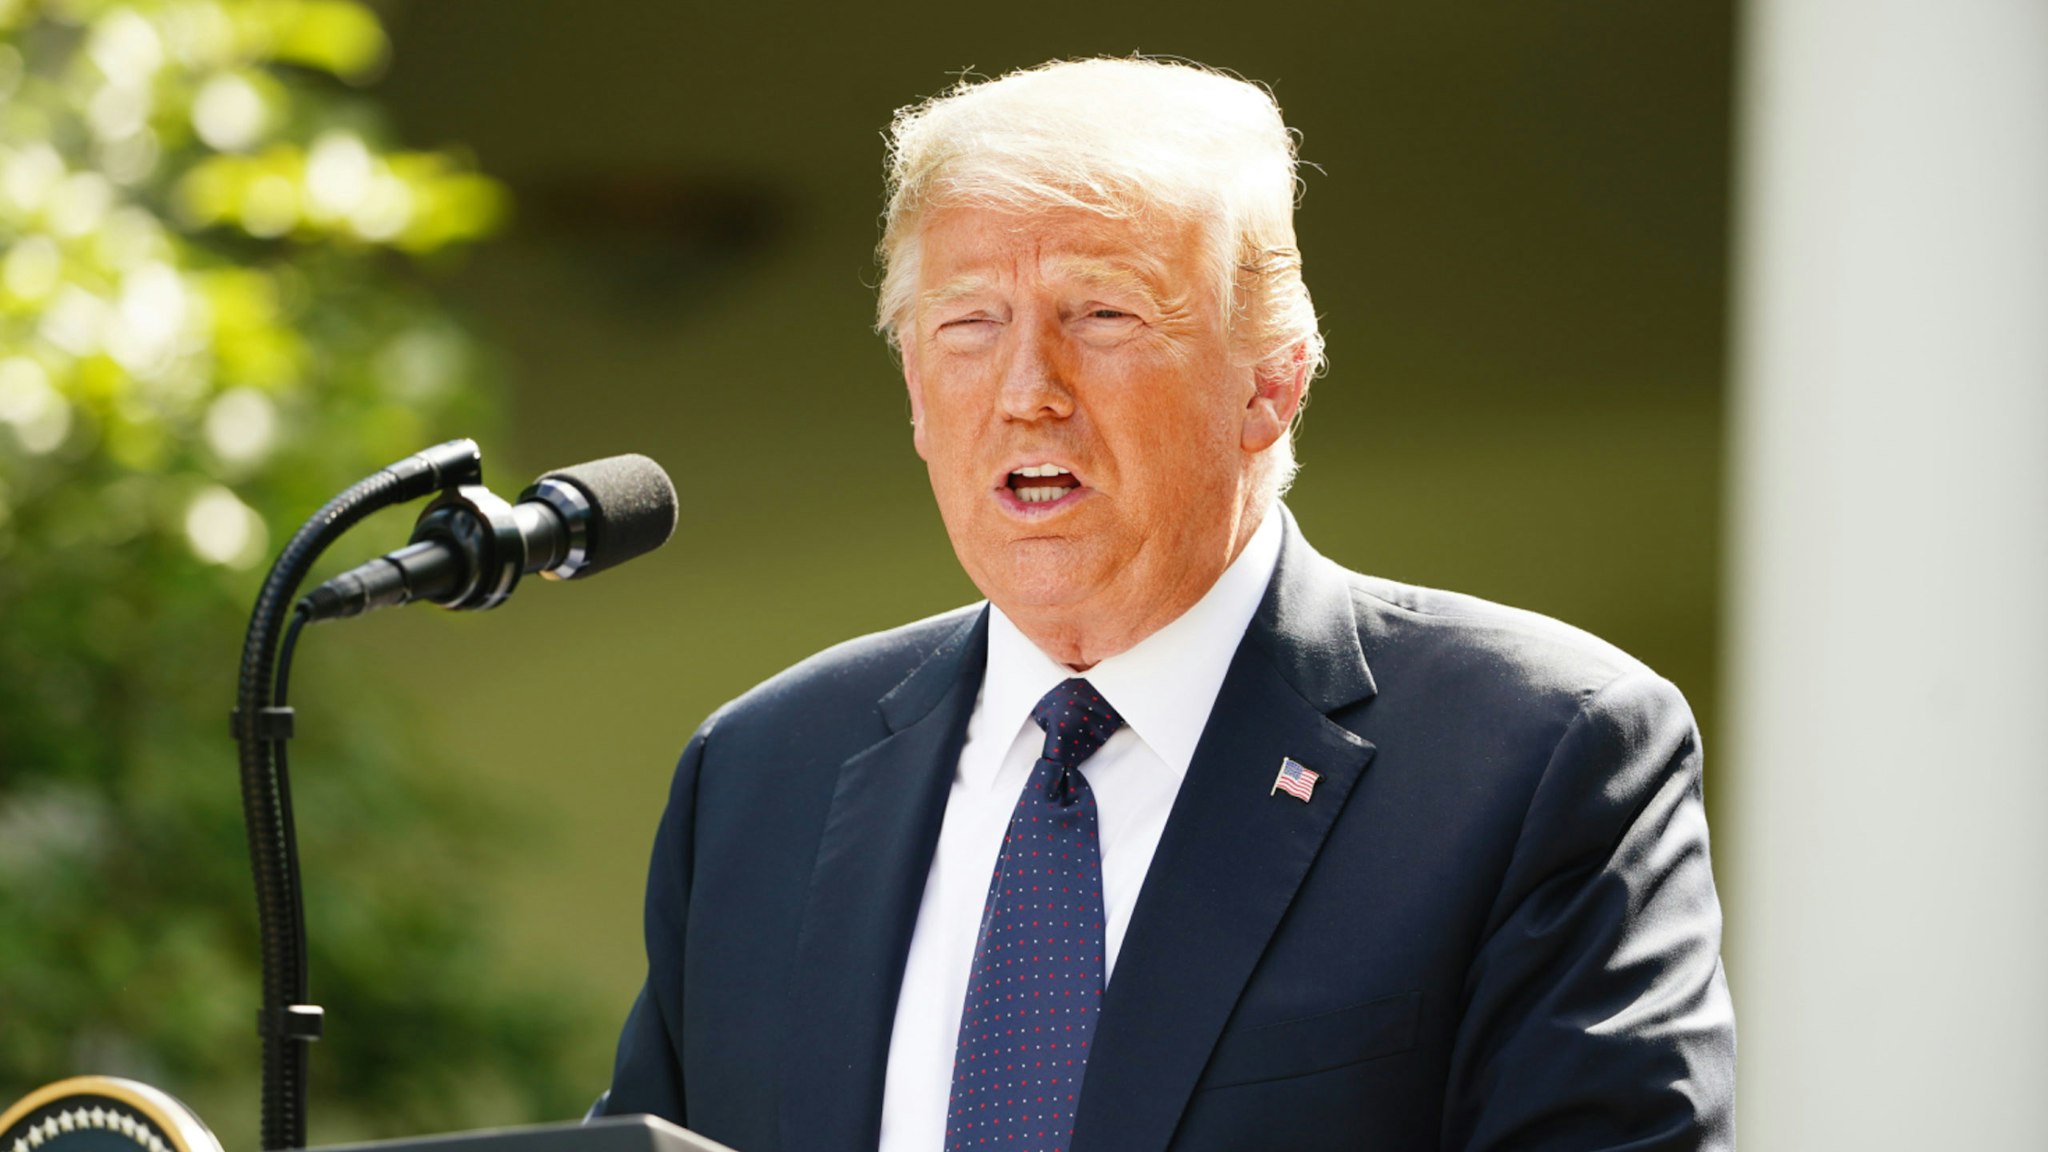 U.S. President Donald Trump speaks during a news conference with Andrzej Duda, Poland's president, not pictured, in the Rose Garden of the White House in Washington, D.C., U.S., on Wednesday, June 24, 2020.